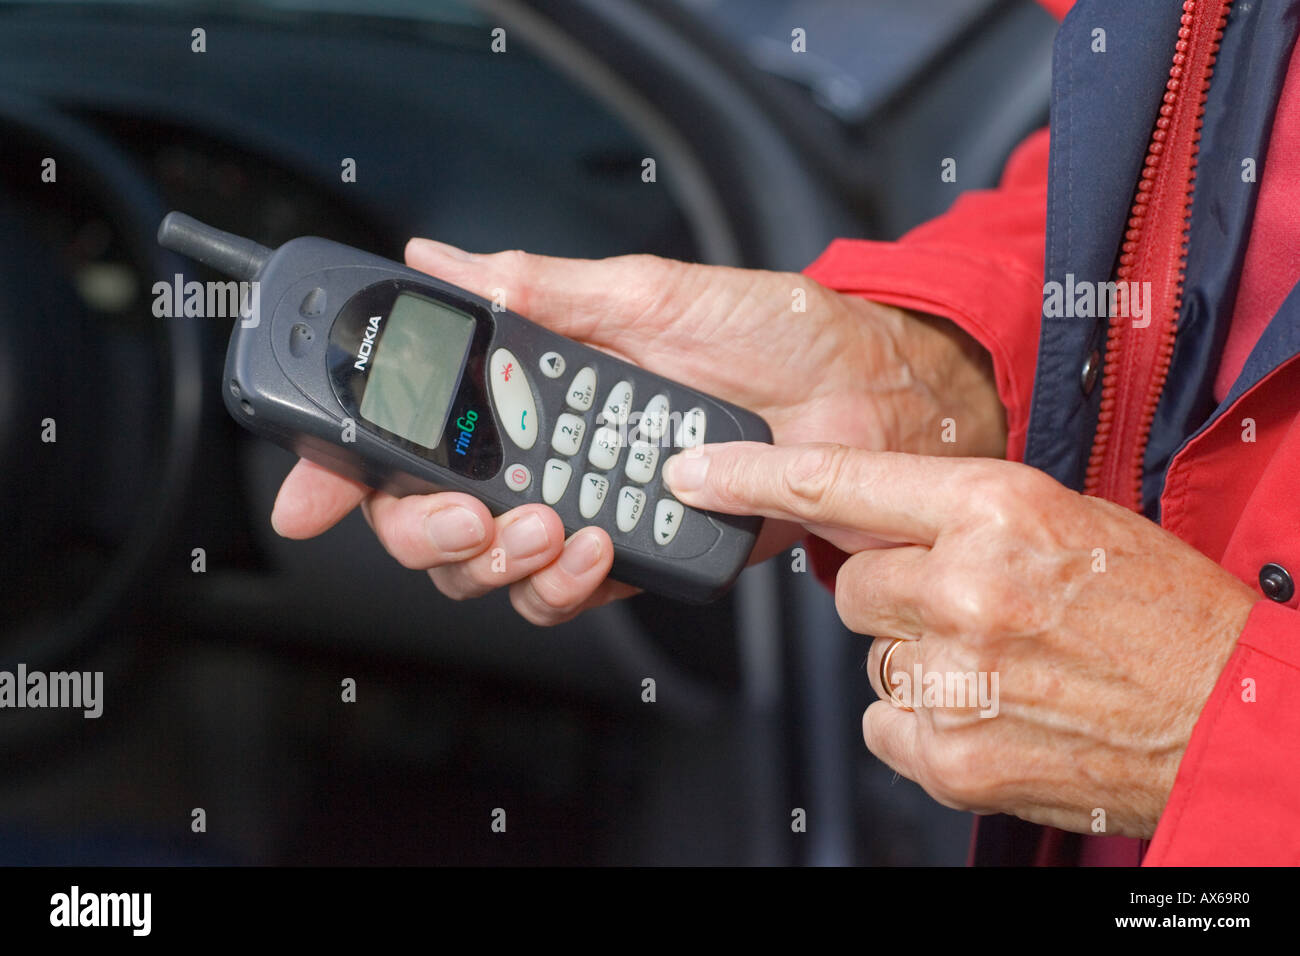 Close up of womans hands dialing on old Nokia mobile phone UK Stock Photo